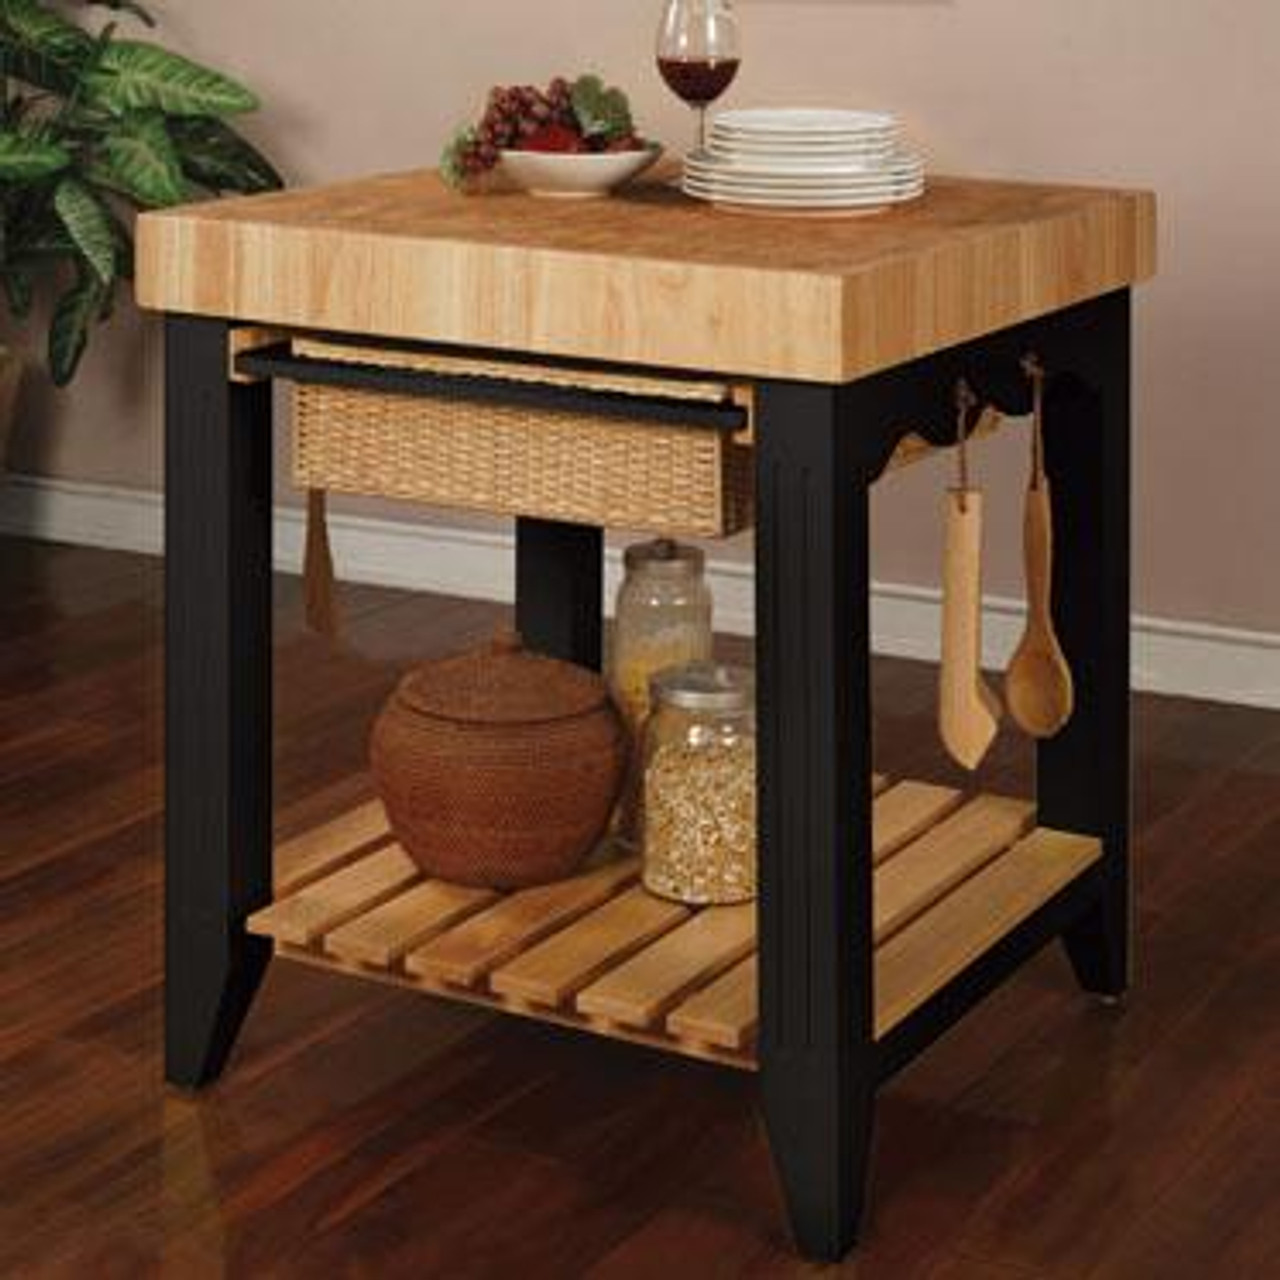 Color Story Black Butcher Block Kitchen Island 502 416 By Powell